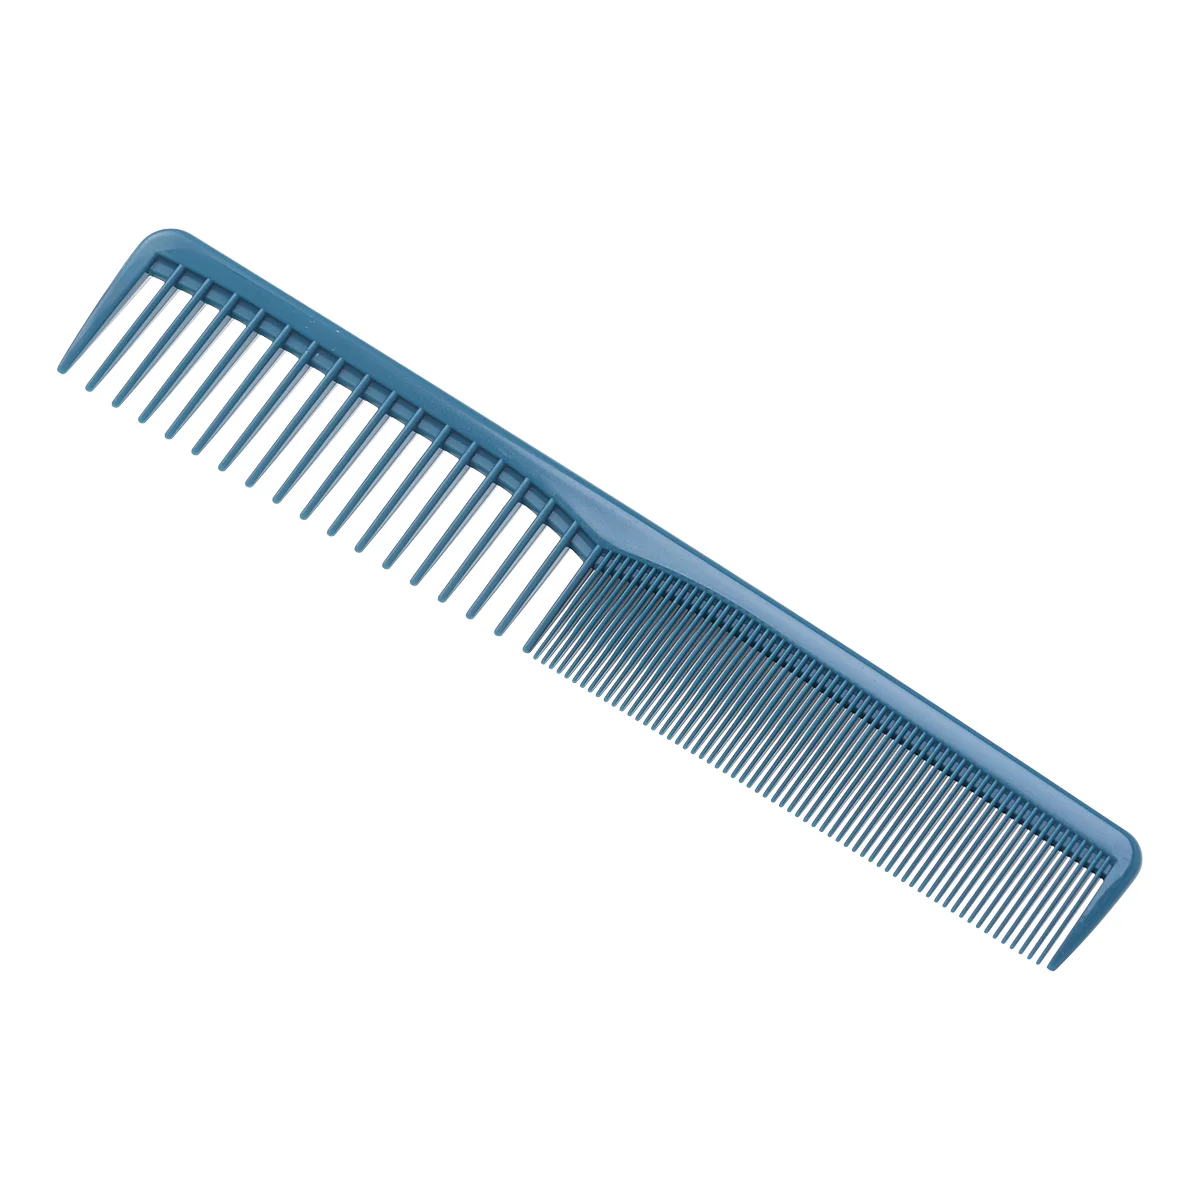 

Comb Hair Barber Combs Professional Cutting Haircut Salon Dressing Hairdressing Curly Women Style Men Resistant Stylist Fiber